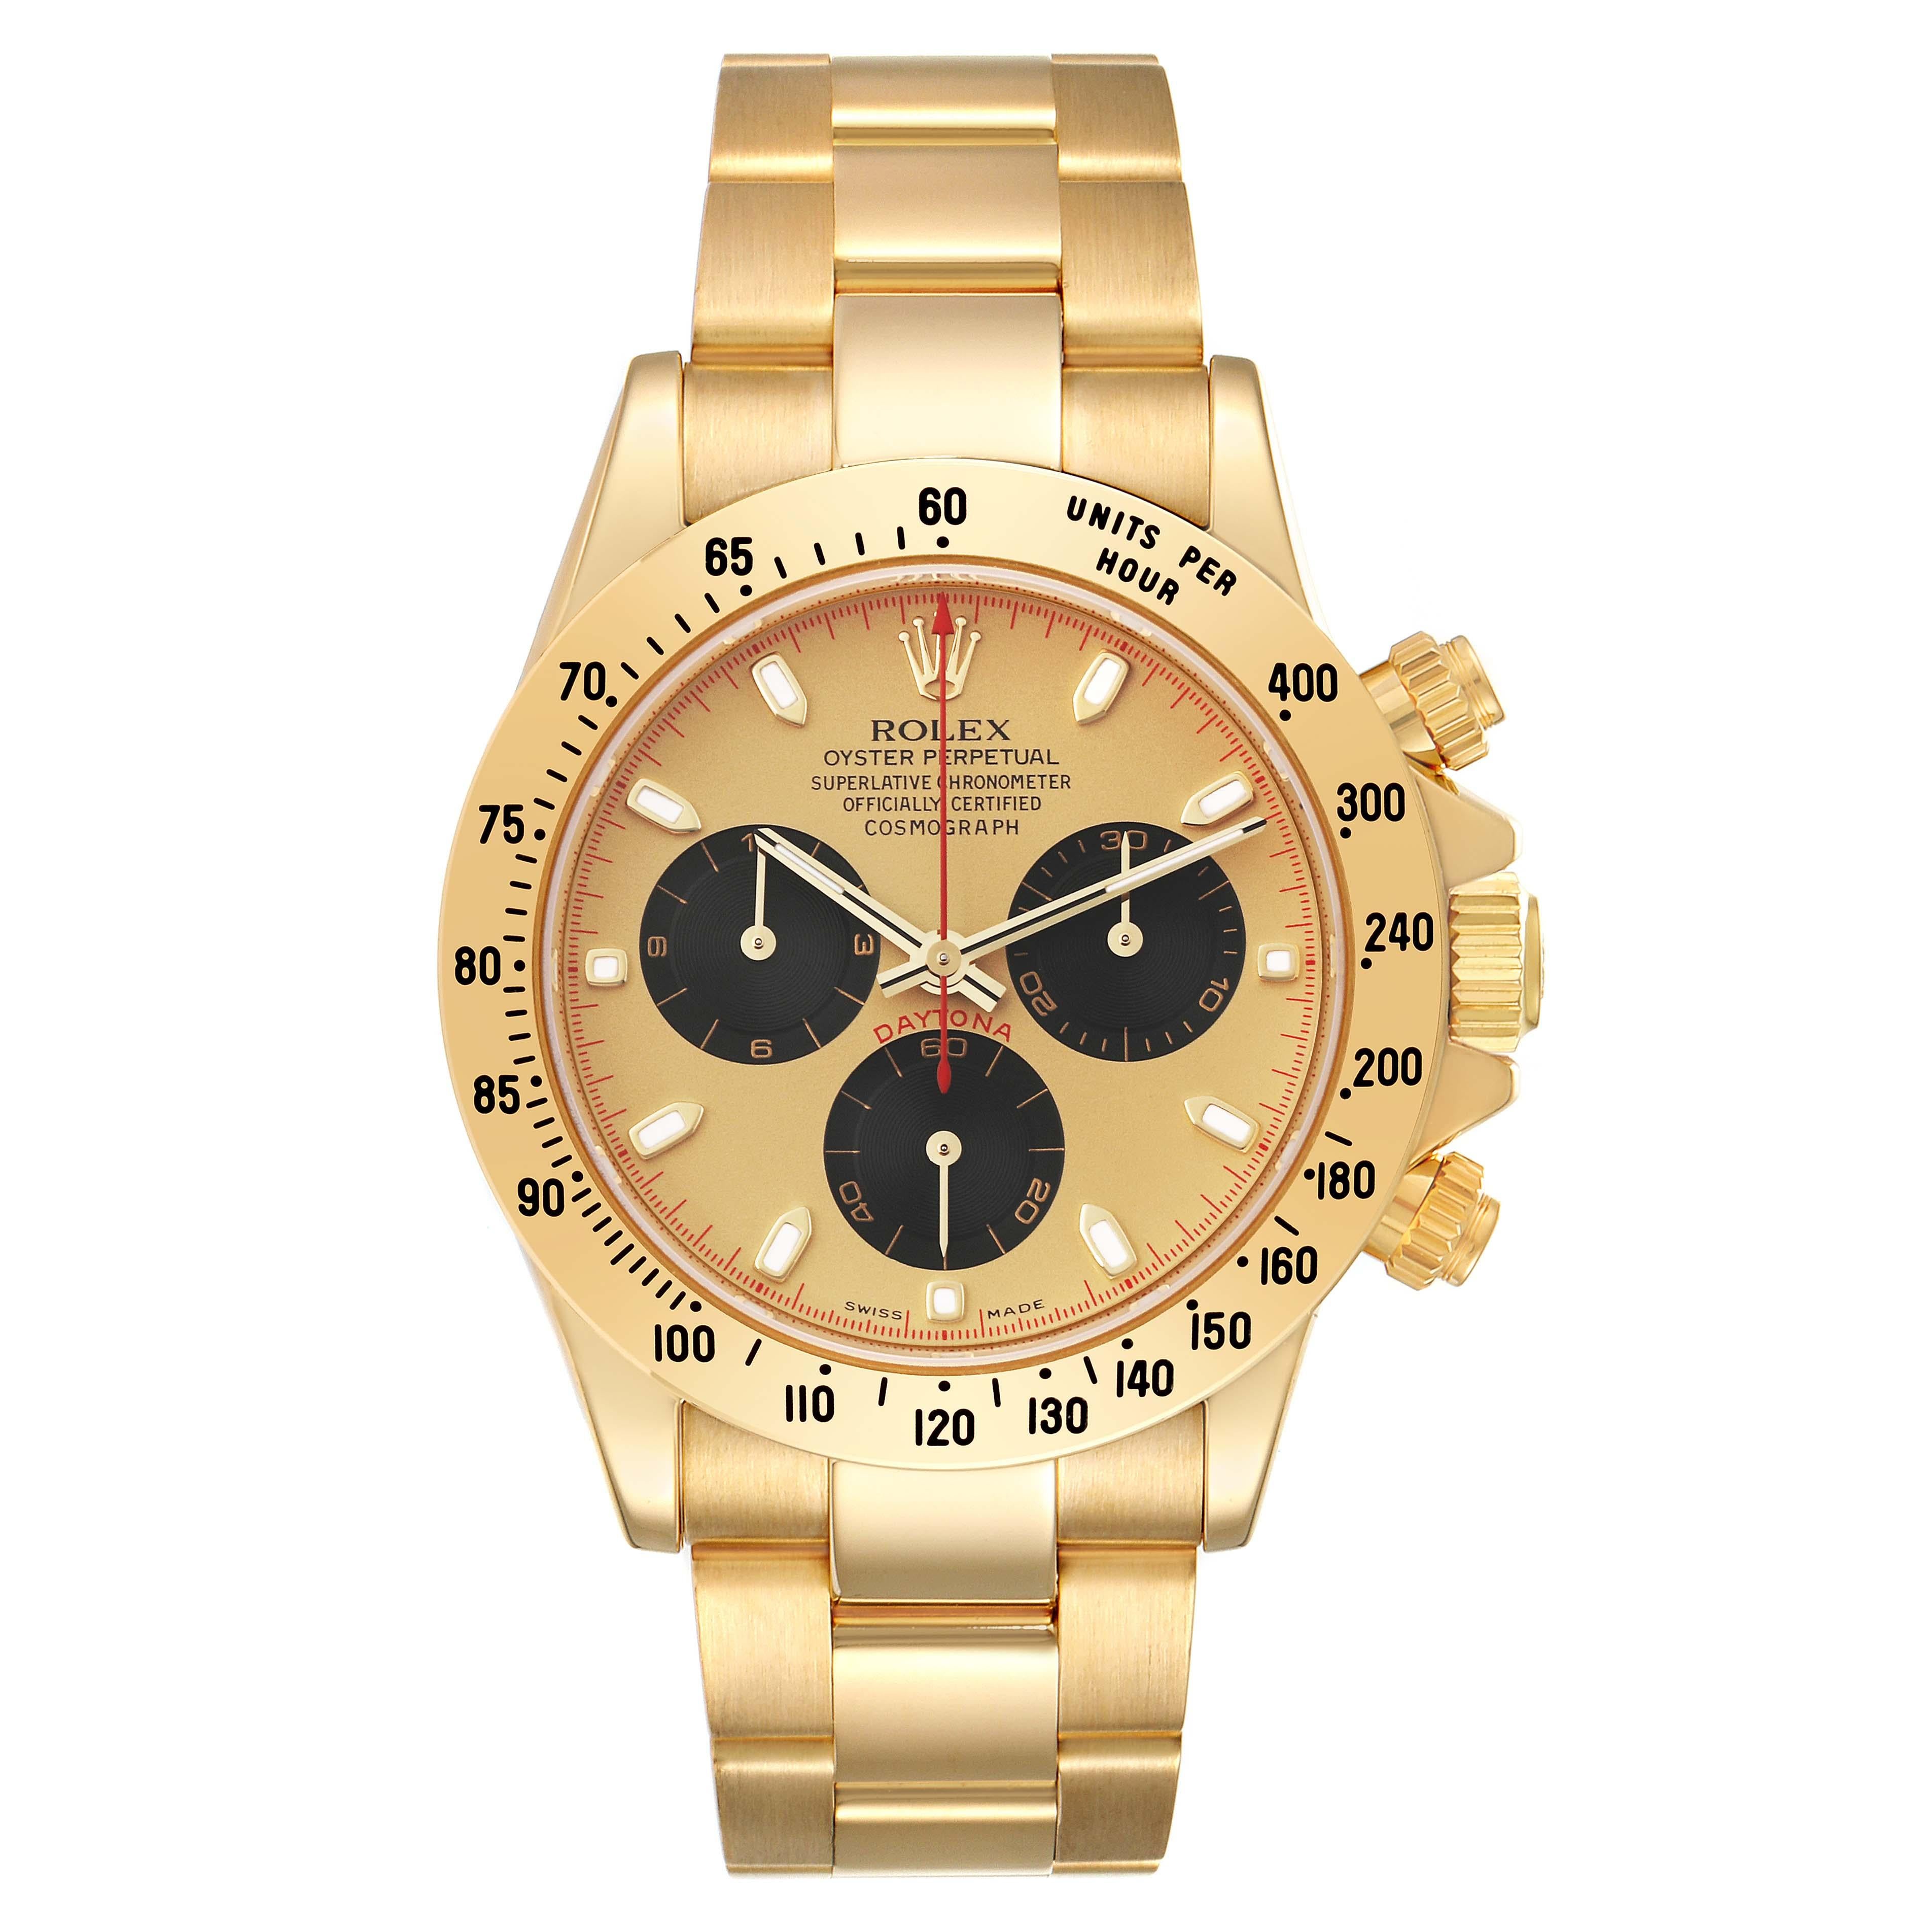 Rolex Daytona Yellow Gold Champagne Dial Mens Watch 116528 Box Papers In Excellent Condition For Sale In Atlanta, GA